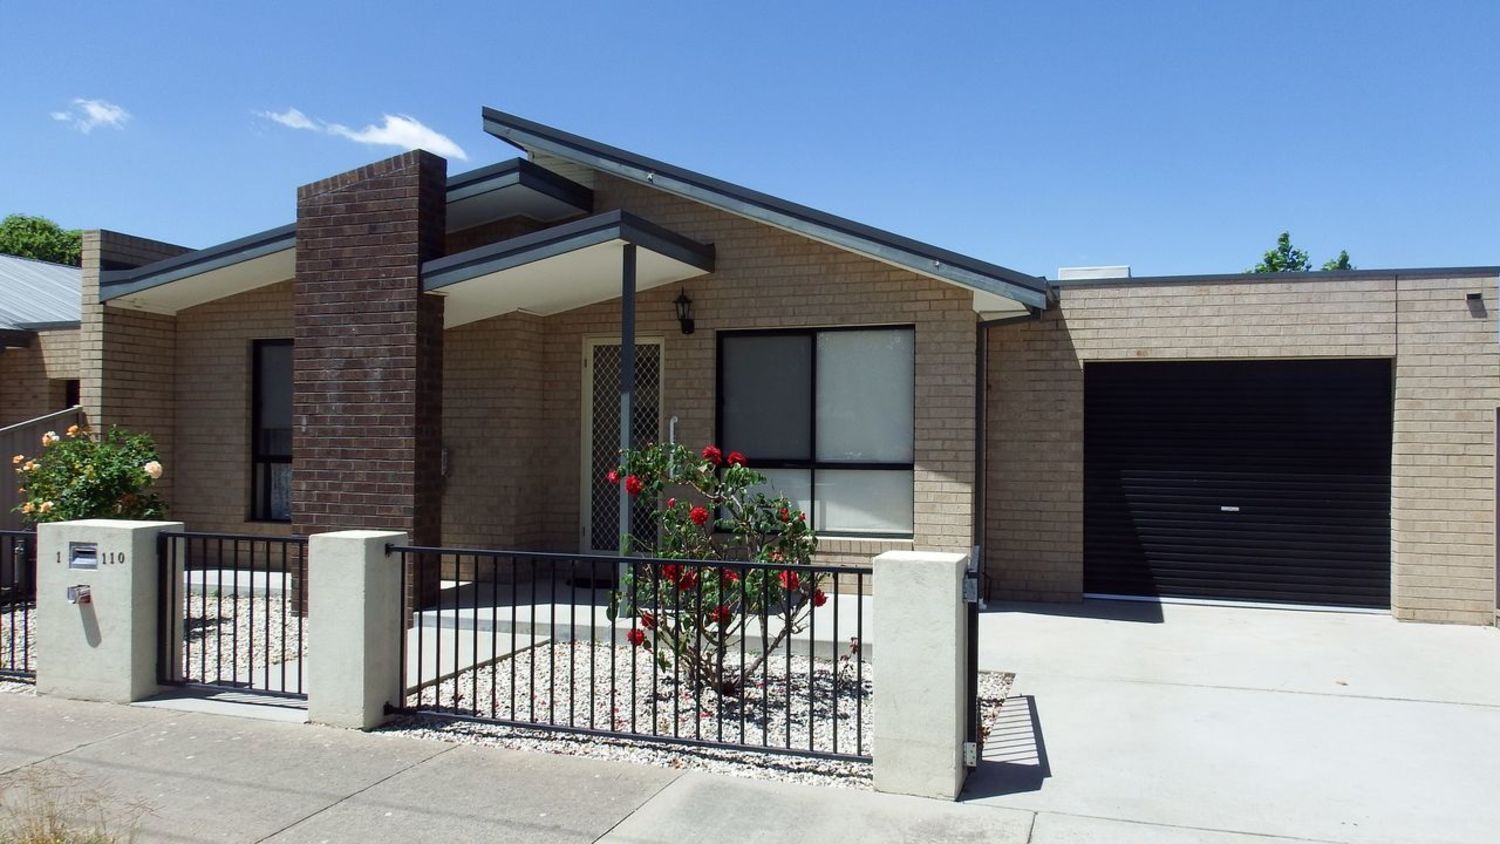 2 bedrooms Townhouse in 1/110 Ashenden Street SHEPPARTON VIC, 3630